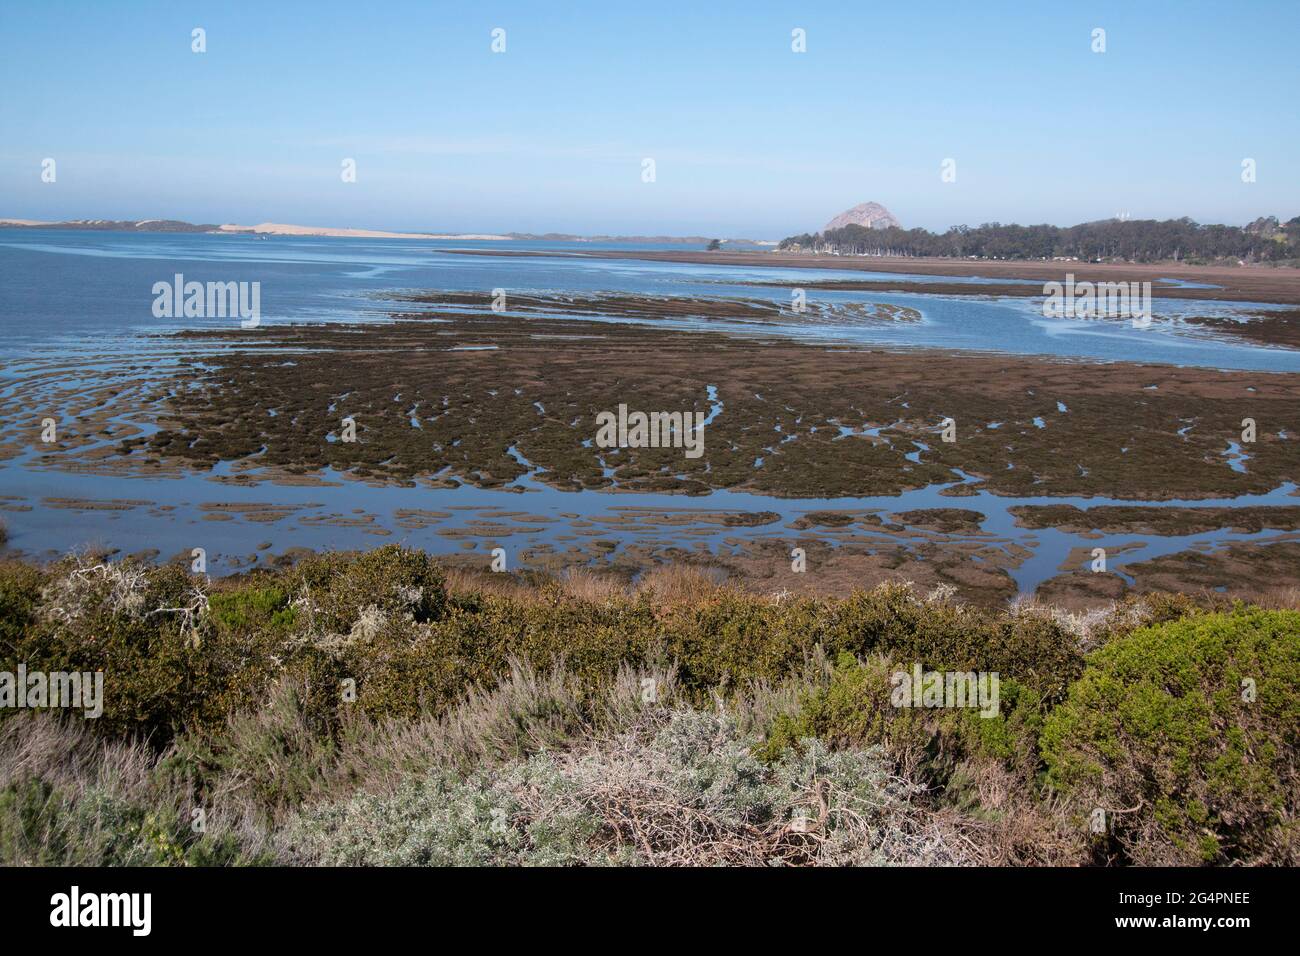 The ecologically-important California's Central Coast Morro Bay Estuary at low tide during late winter. Stock Photo